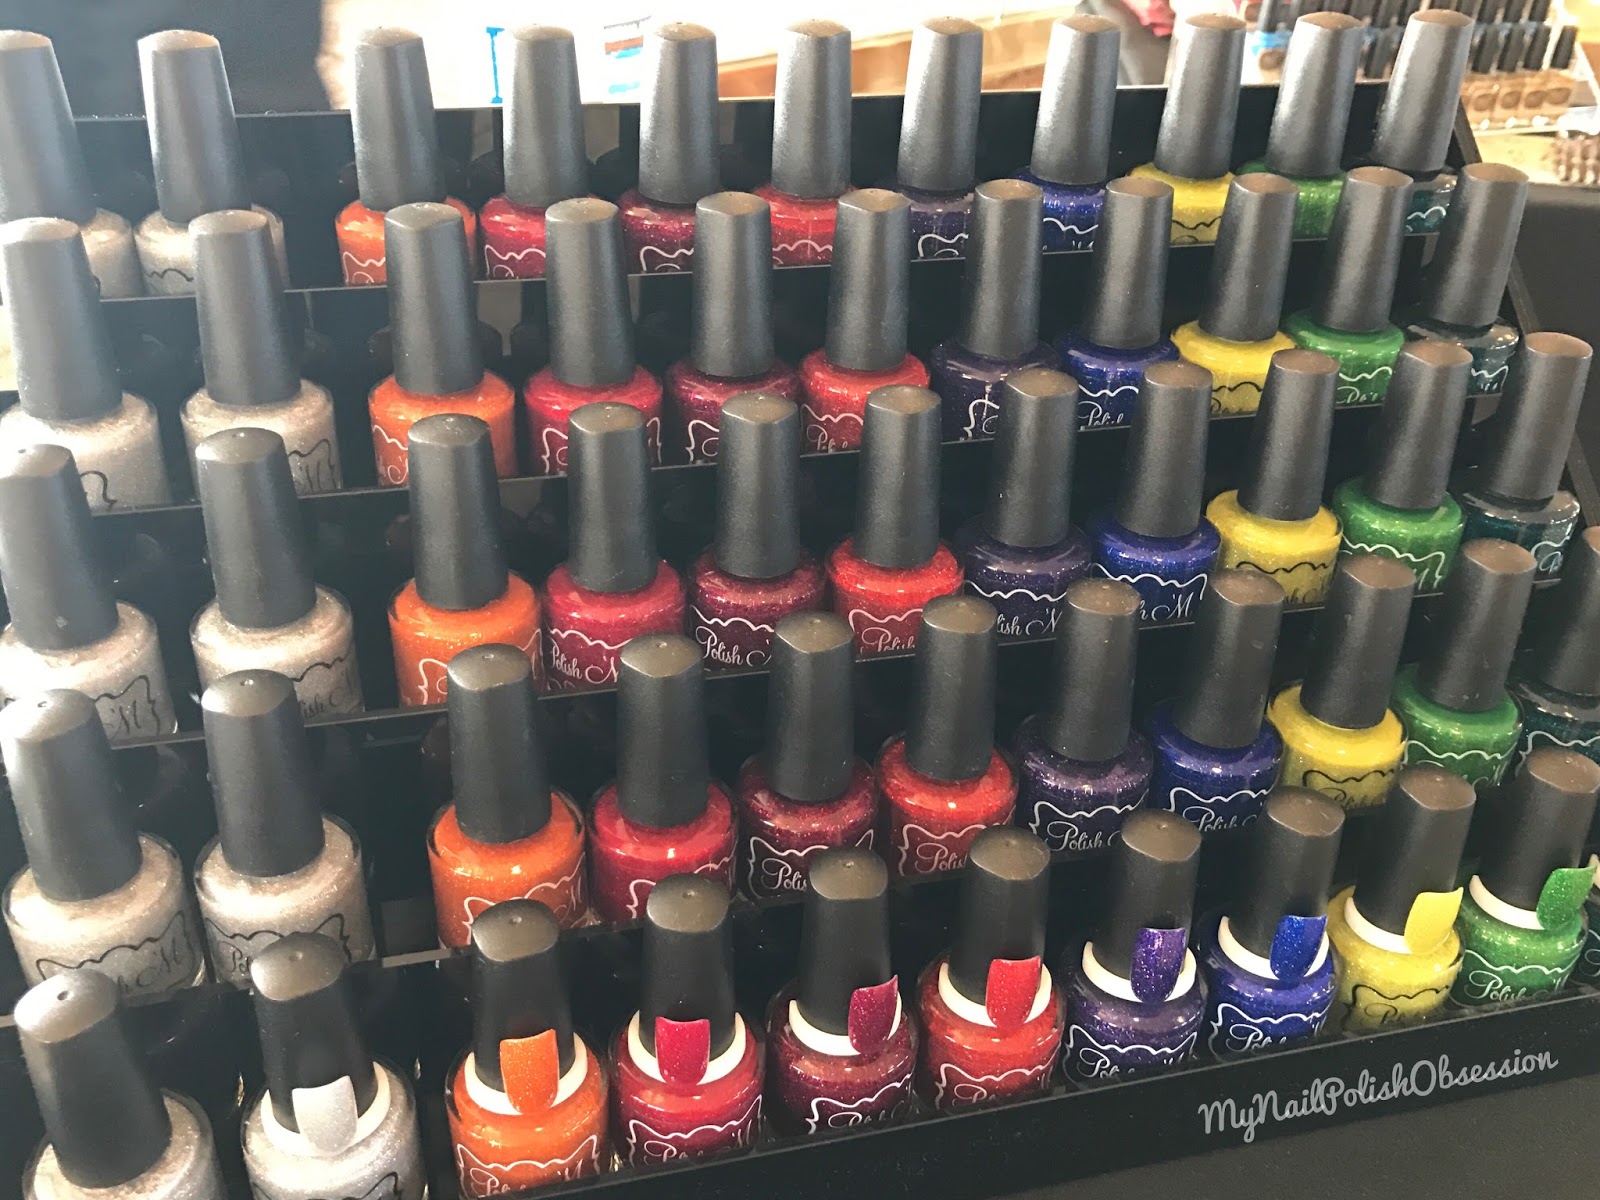 My Nail Polish Obsession: The Indie Shop Event Coverage